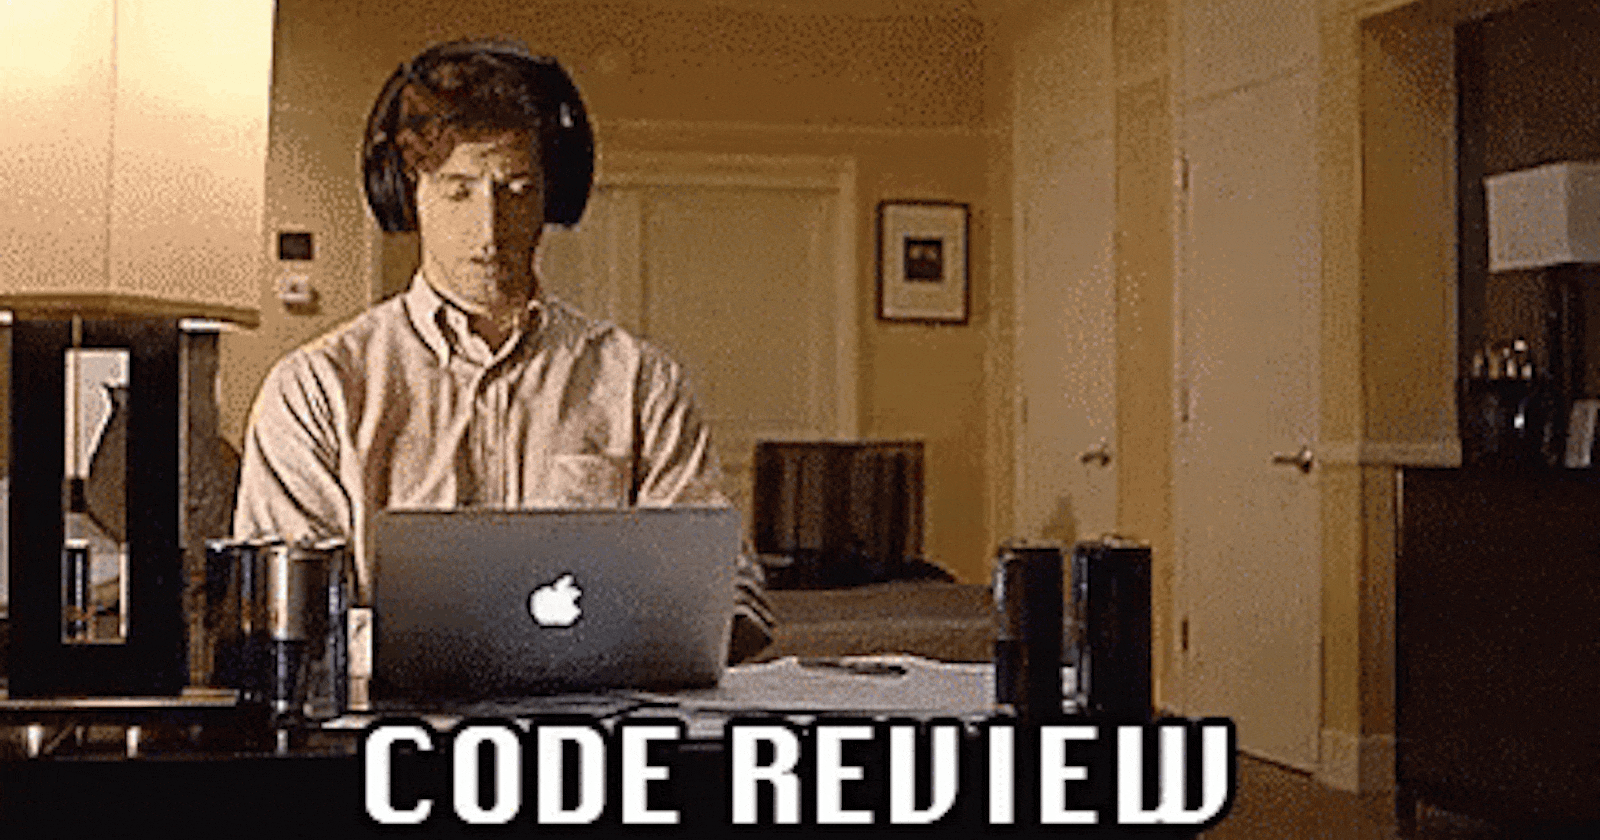 Let's improve the code reviews.